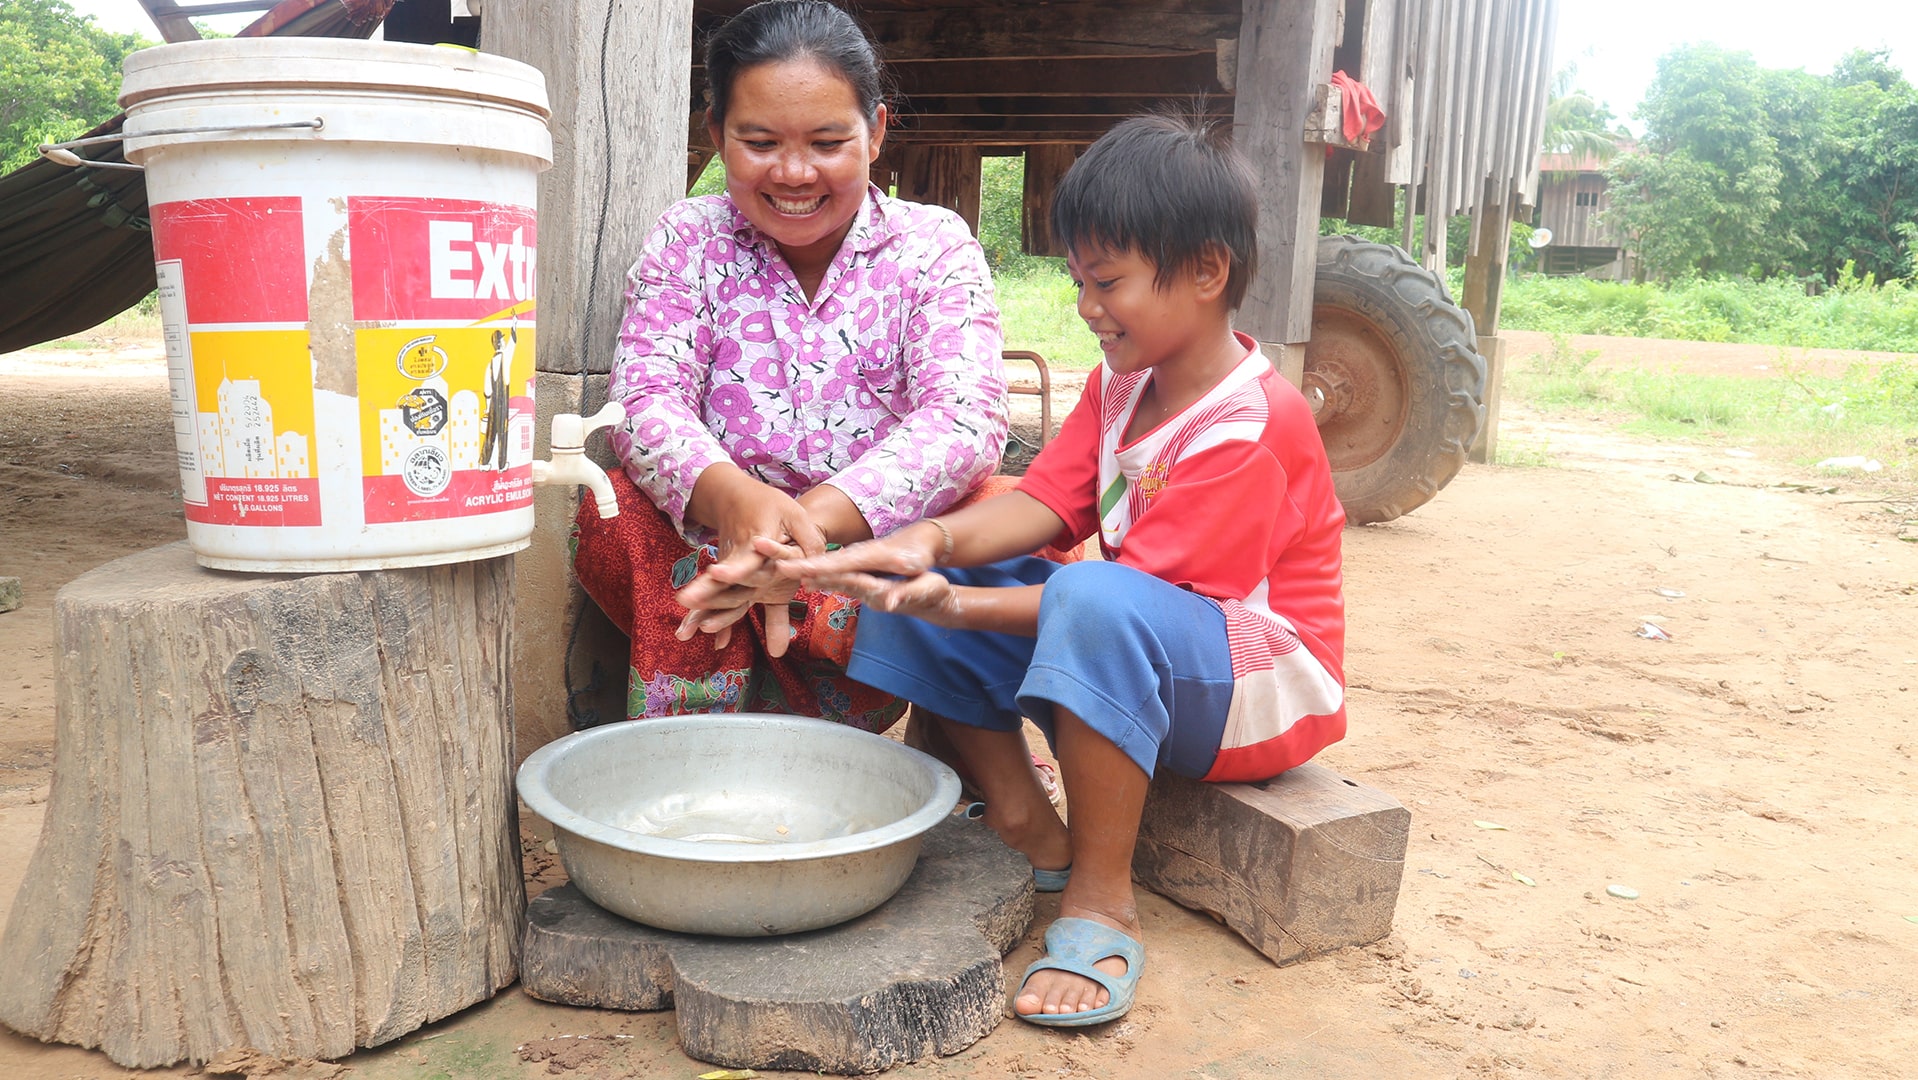 A woman teaches a young boy how to wash his hands